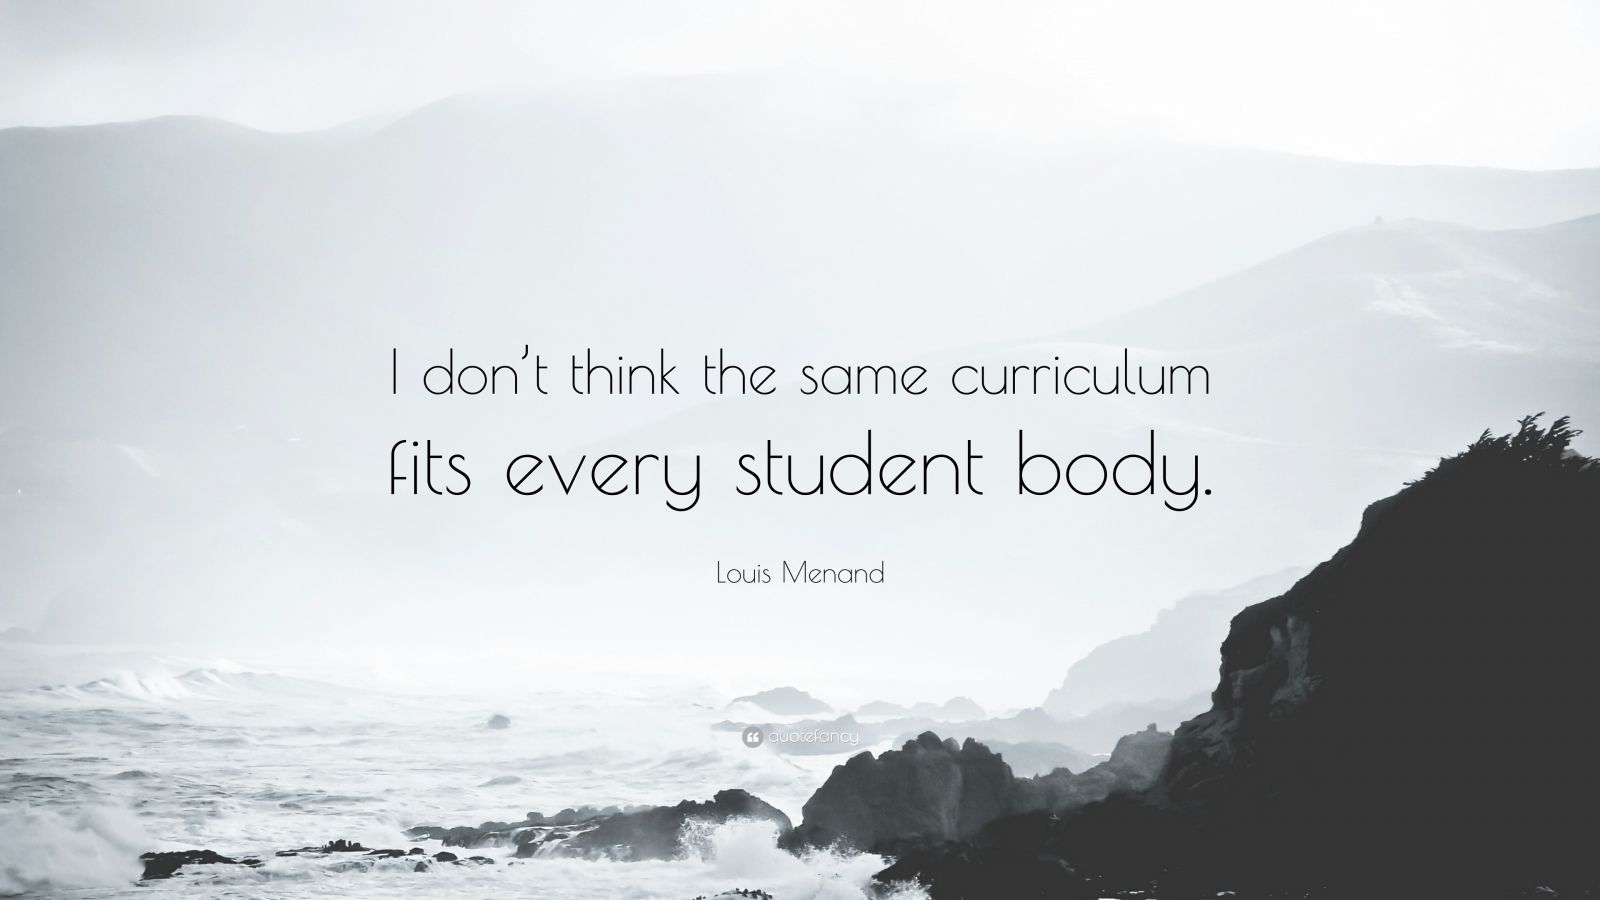 Louis Menand Quotes (35 wallpapers) - Quotefancy